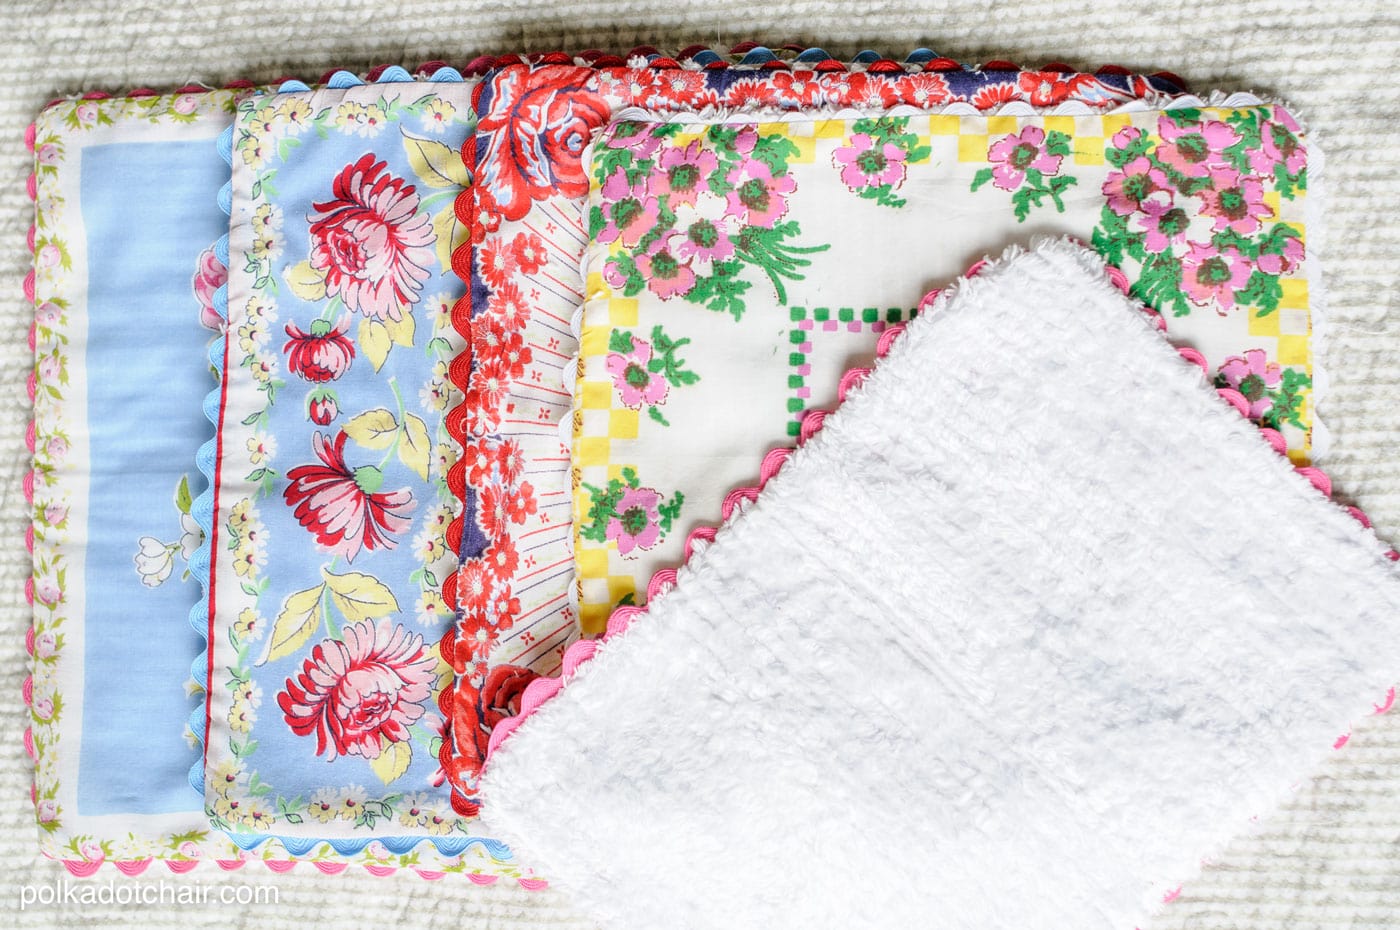 Sewing tutorial showing how to make baby burp cloths from vintage hankies 